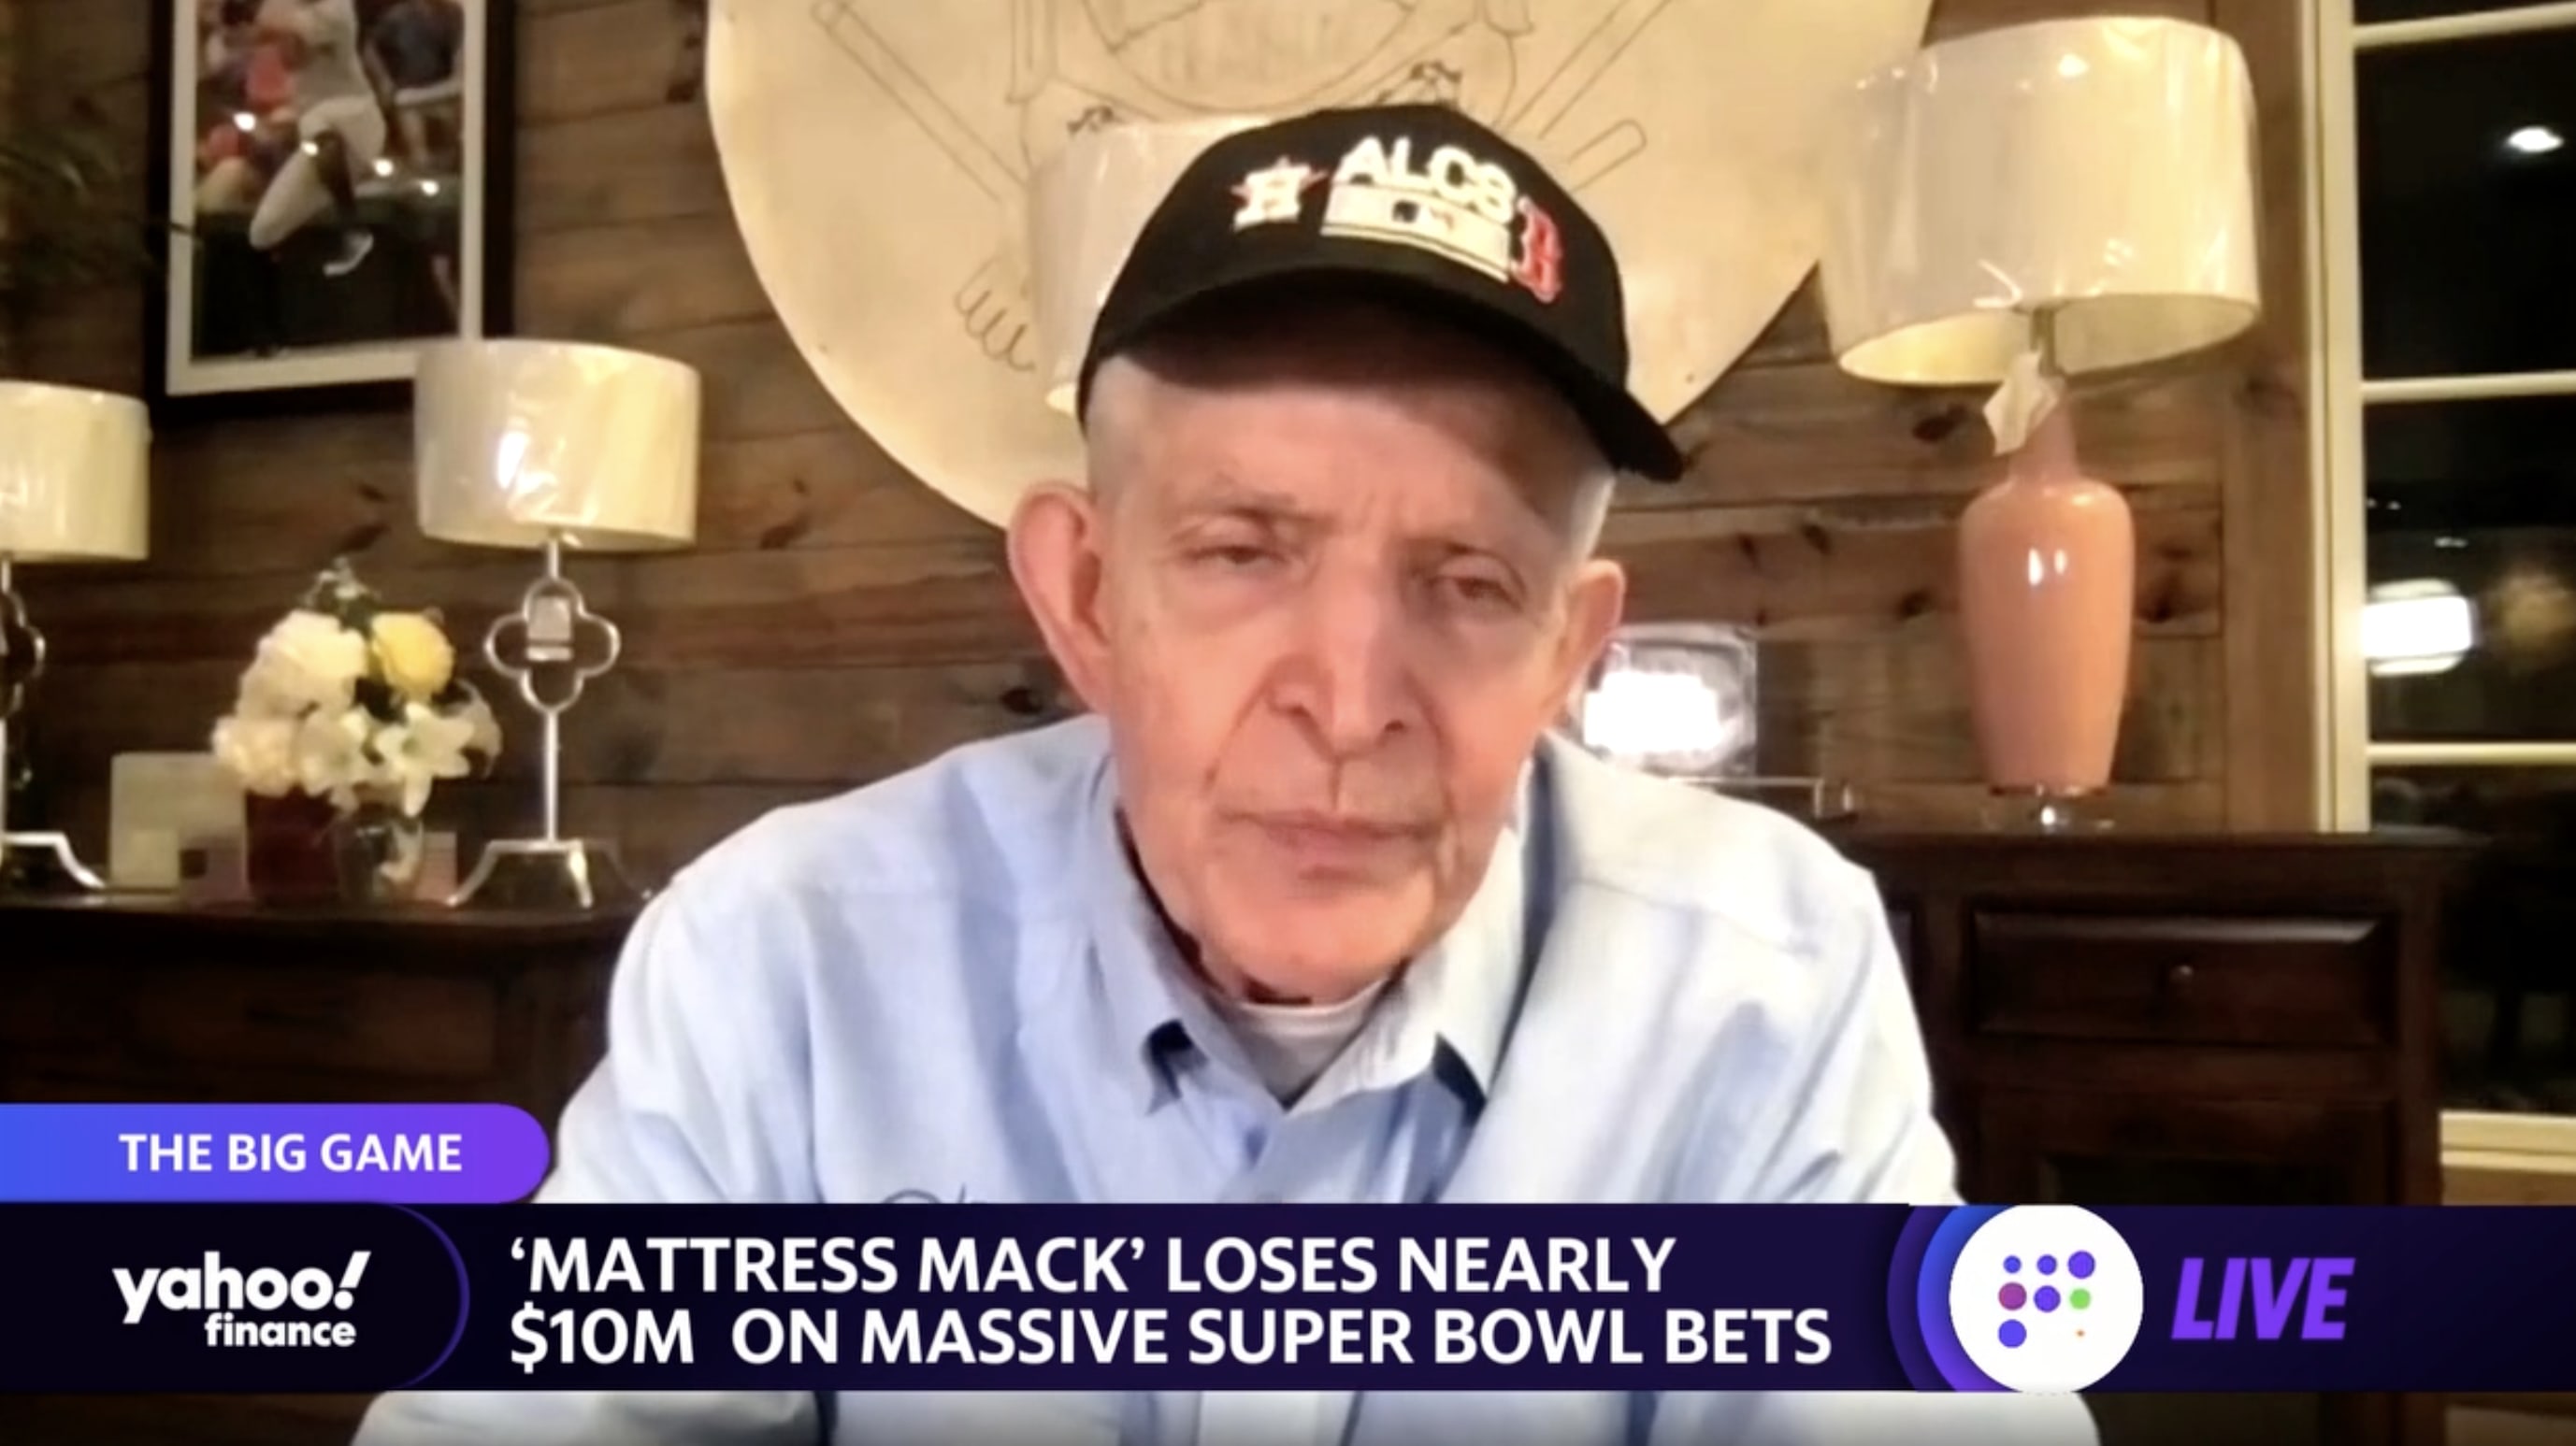 Mattress Mack' lost nearly $10M on Super Bowl bets: 'The highs and lows  were terrific